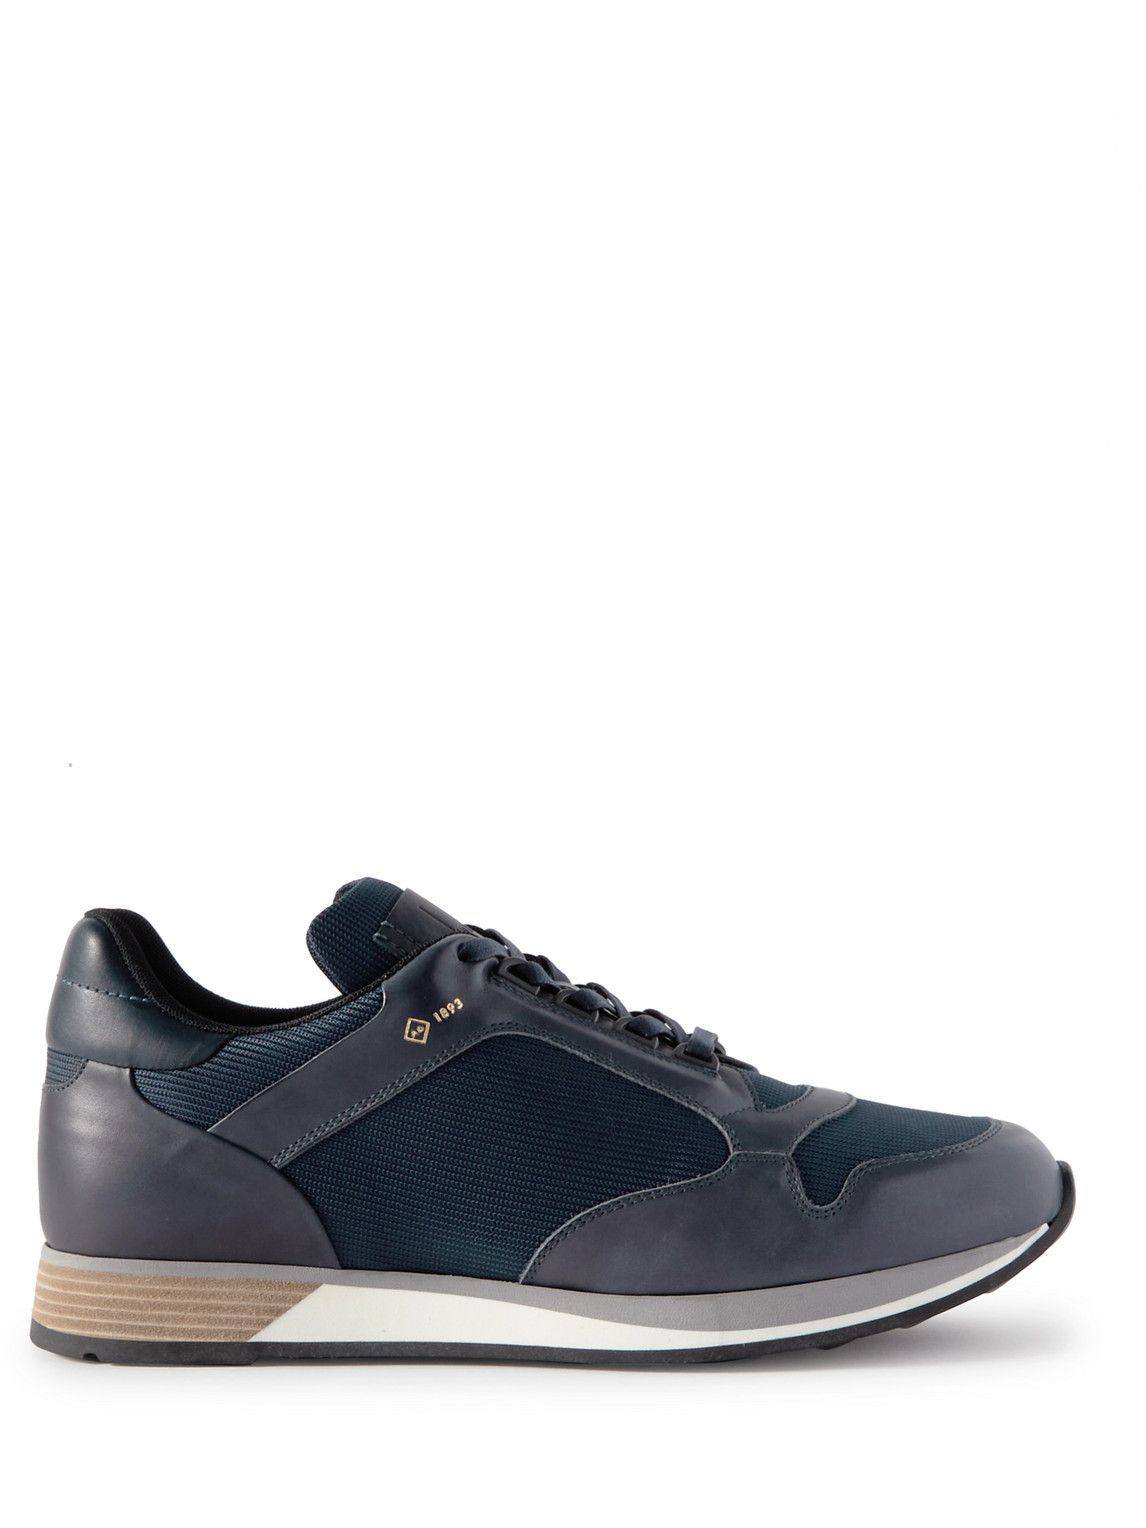 Dunhill - Duke Mesh and Leather Sneakers - Blue Dunhill